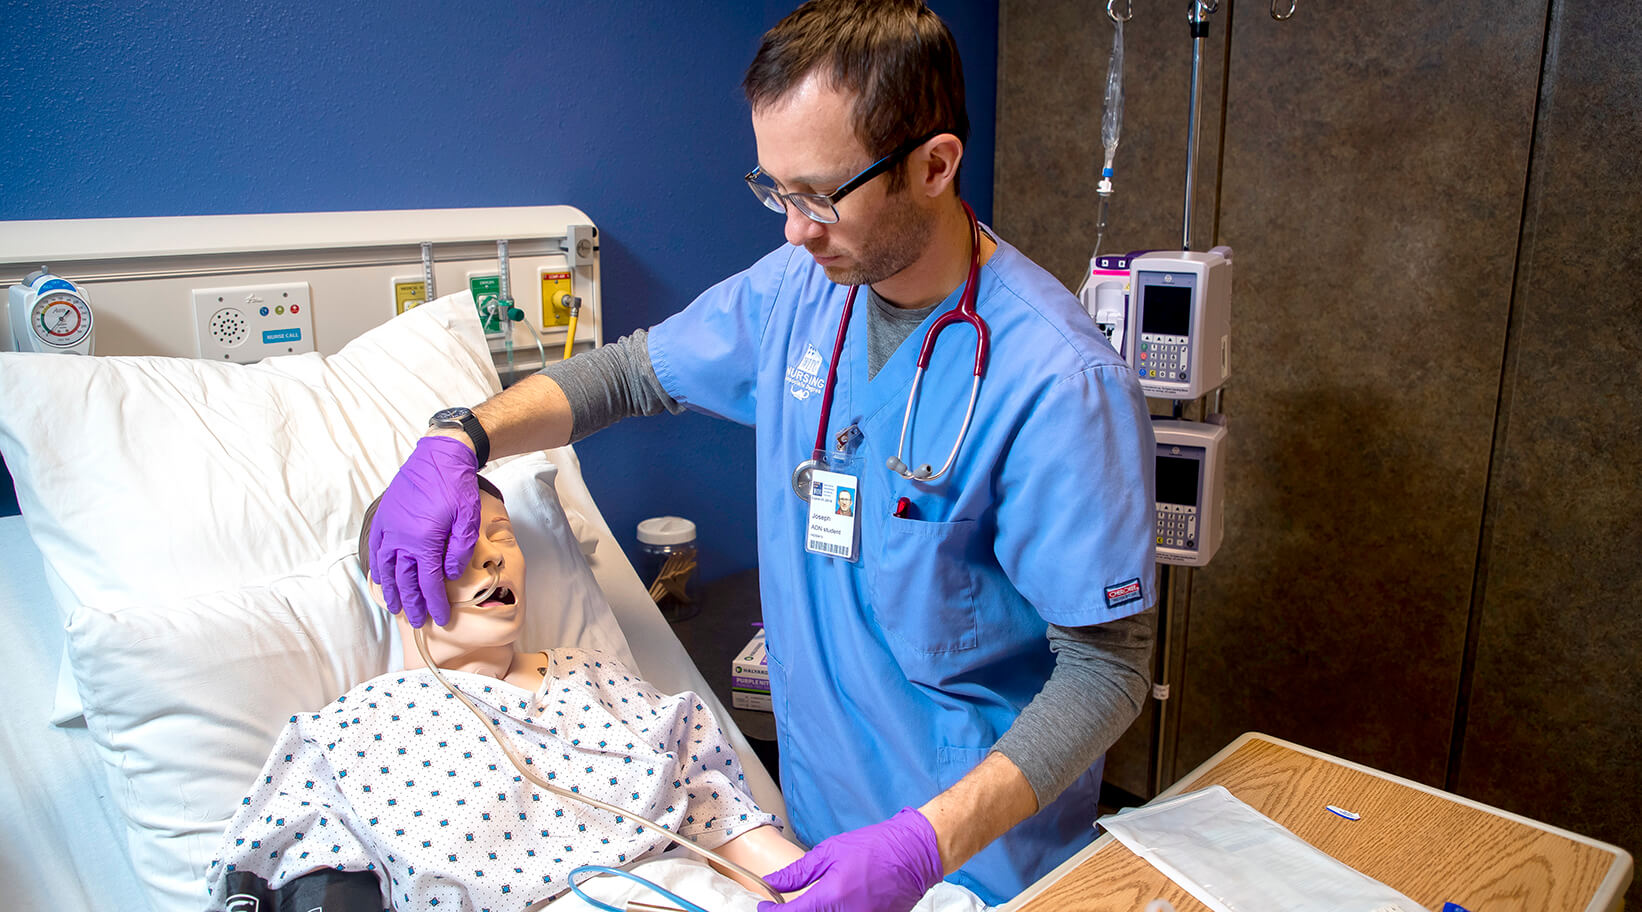 A nursing student working with a simulated patient